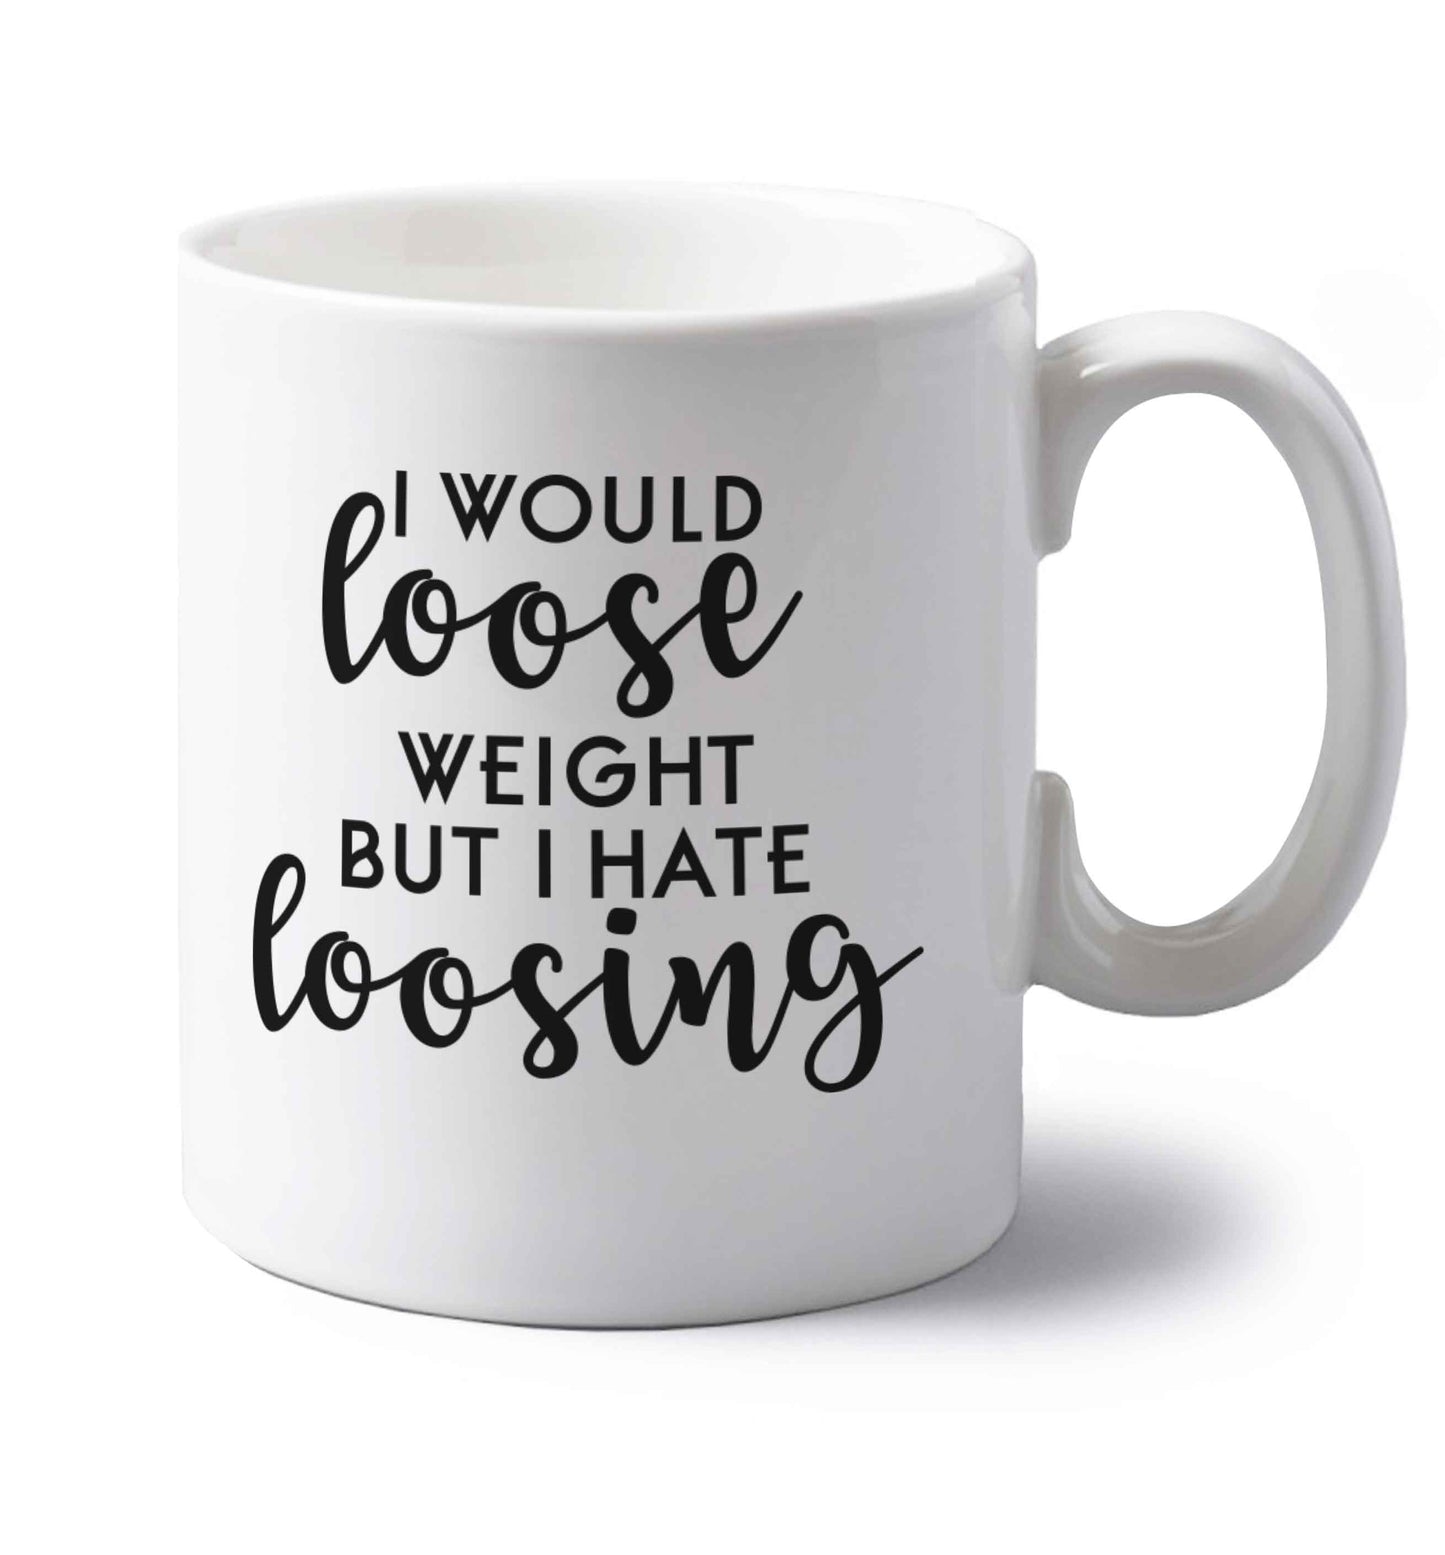 I would loose weight but I hate loosing left handed white ceramic mug 